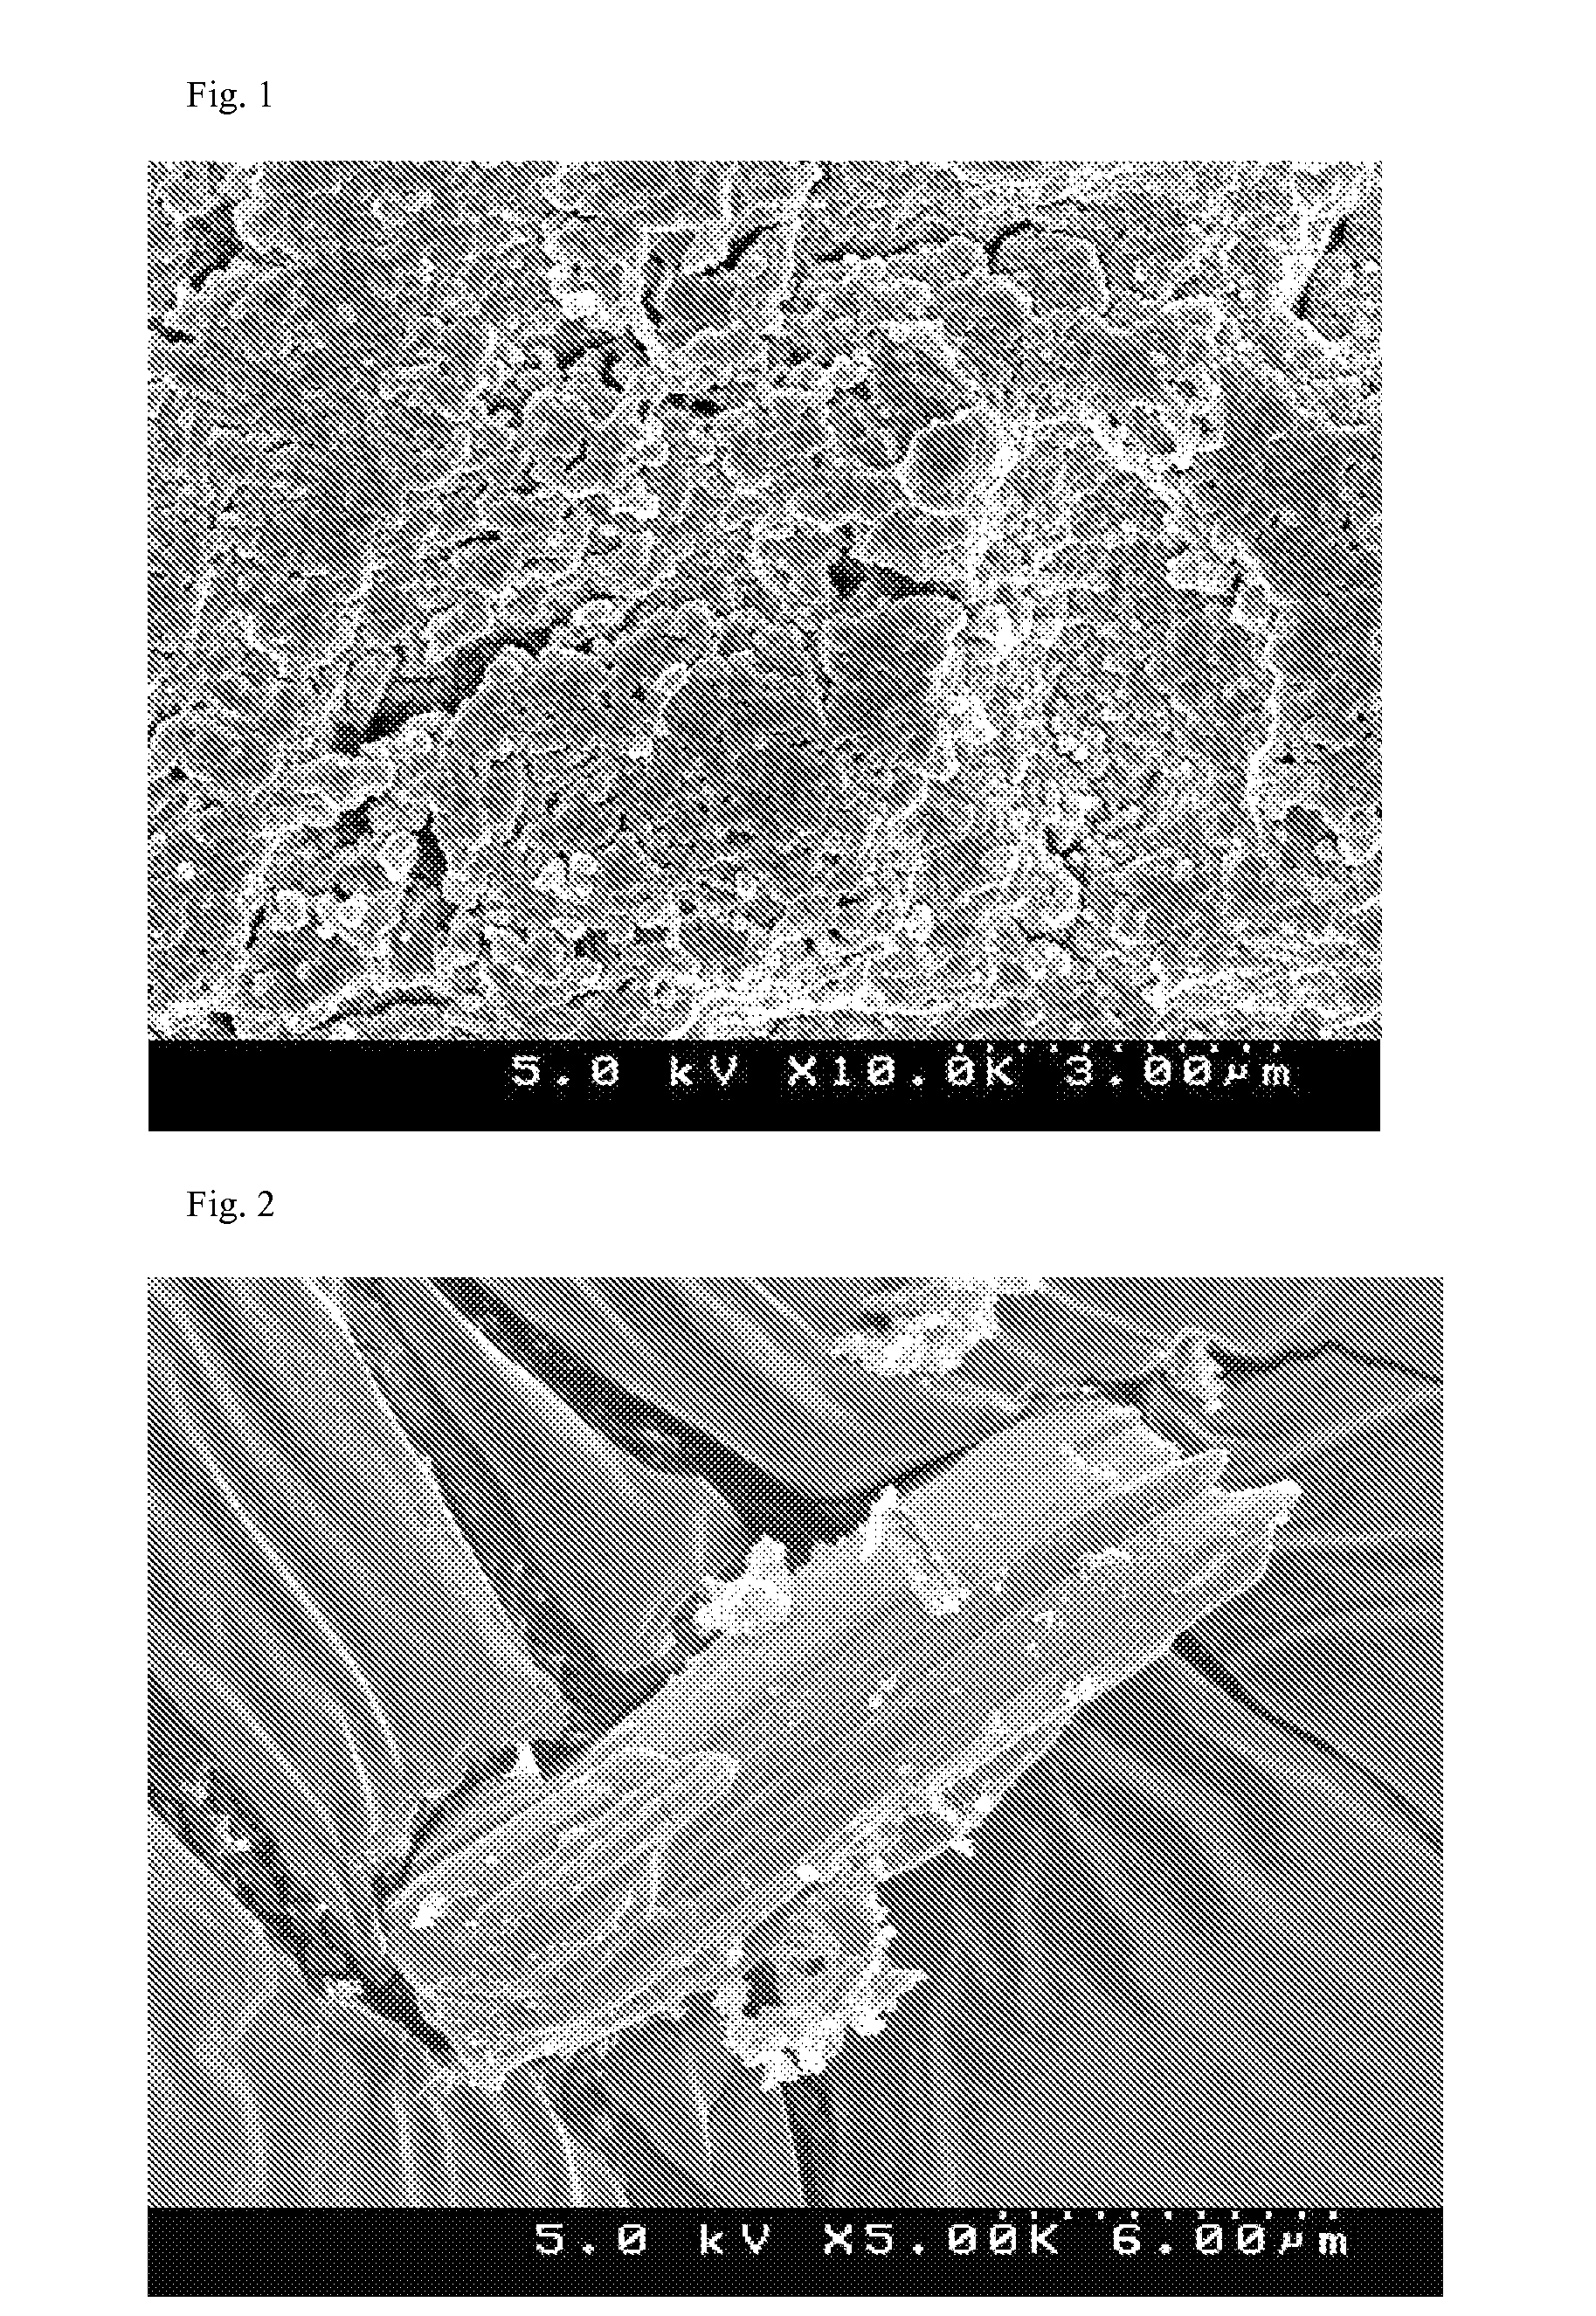 Method for improving the aqueous solubility of poorly-soluble substances